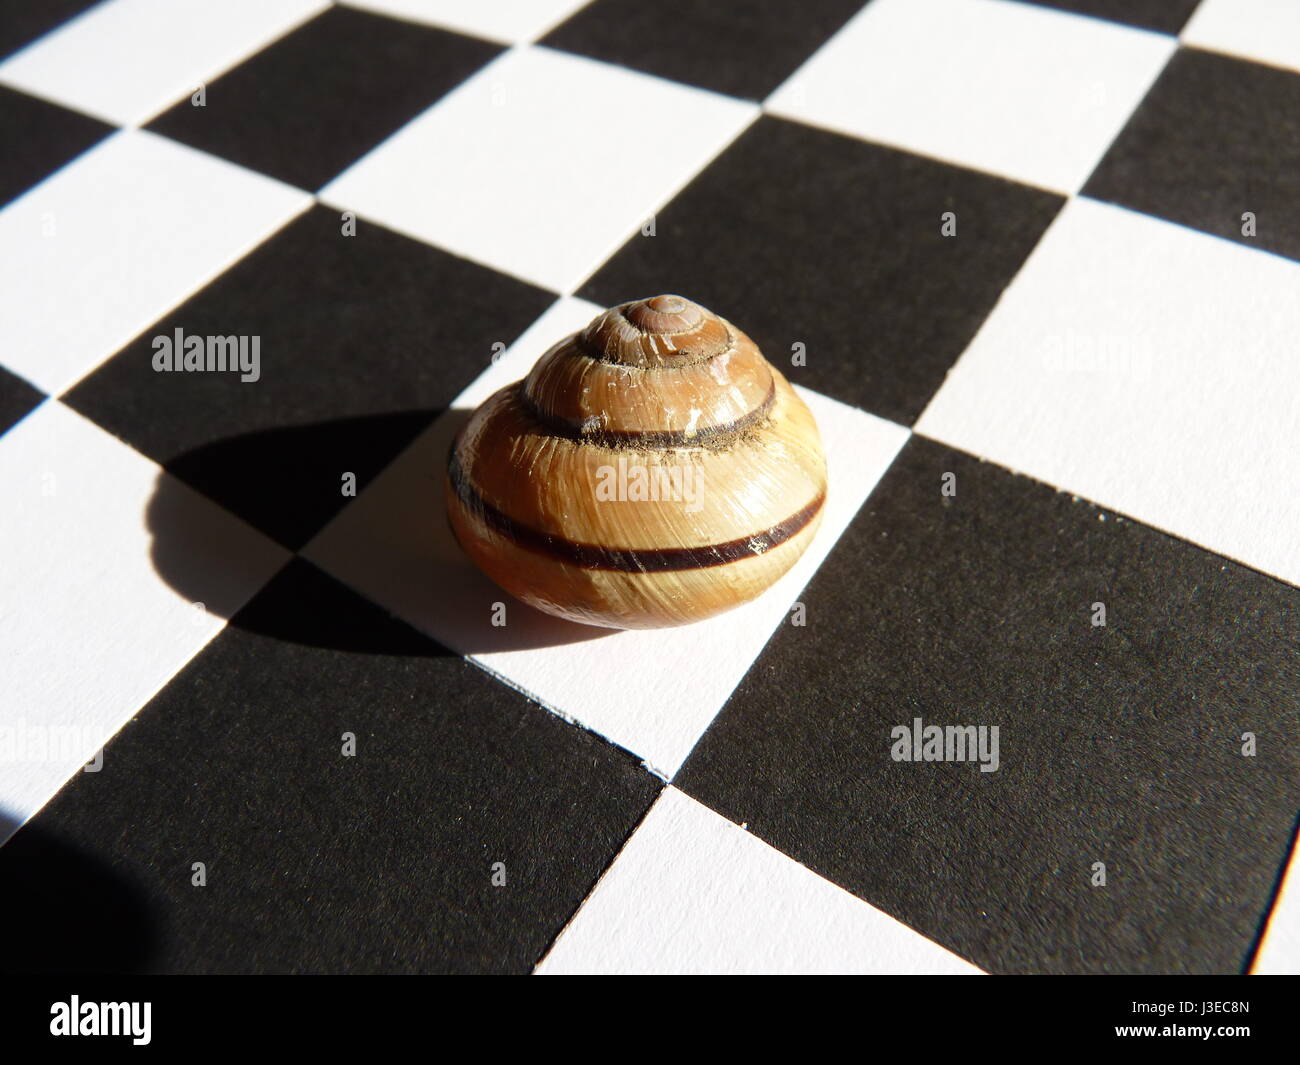 Pied striped snail shell on black and white chequer board. Stock Photo